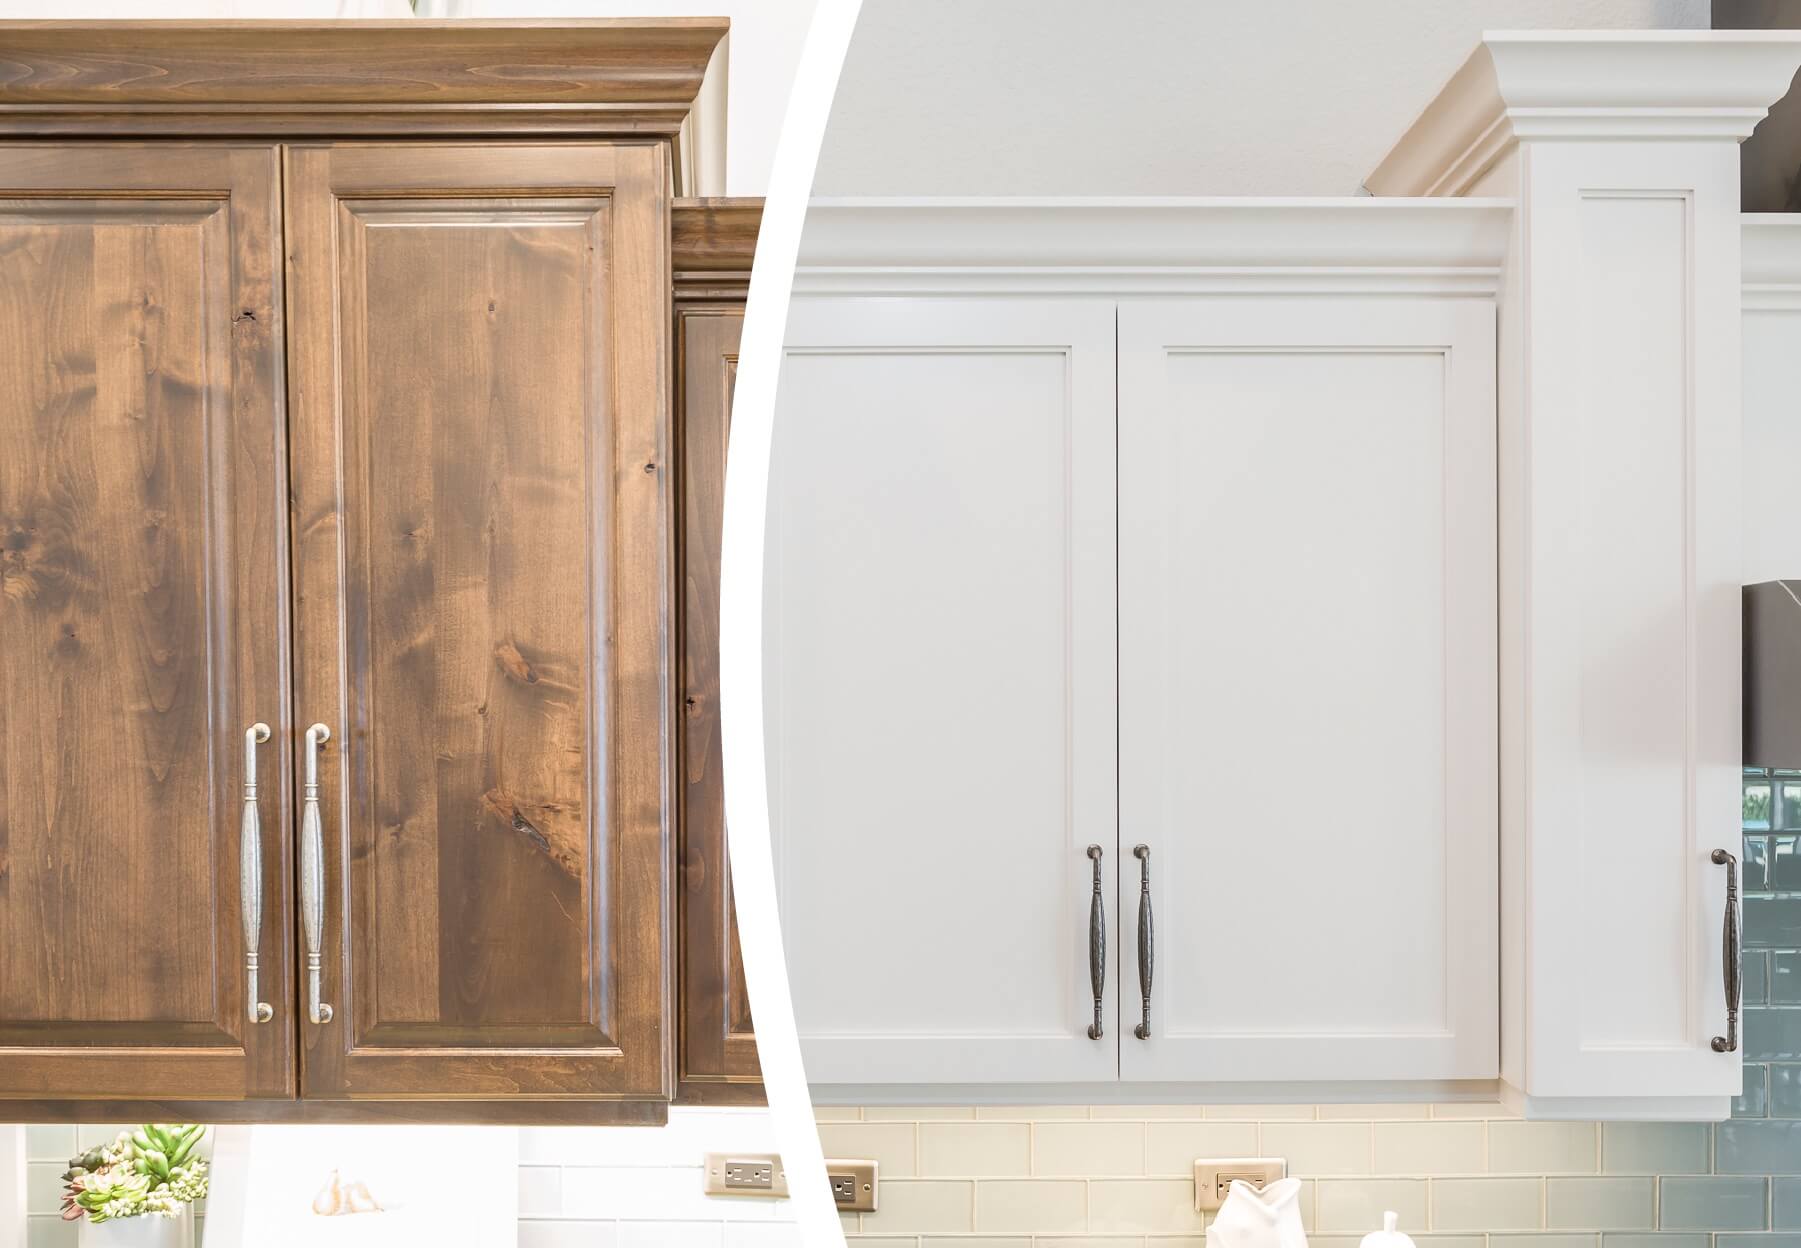 Cabinet Door Replacement N Hance Ontario, How Much To Replace Kitchen Cabinets Doors